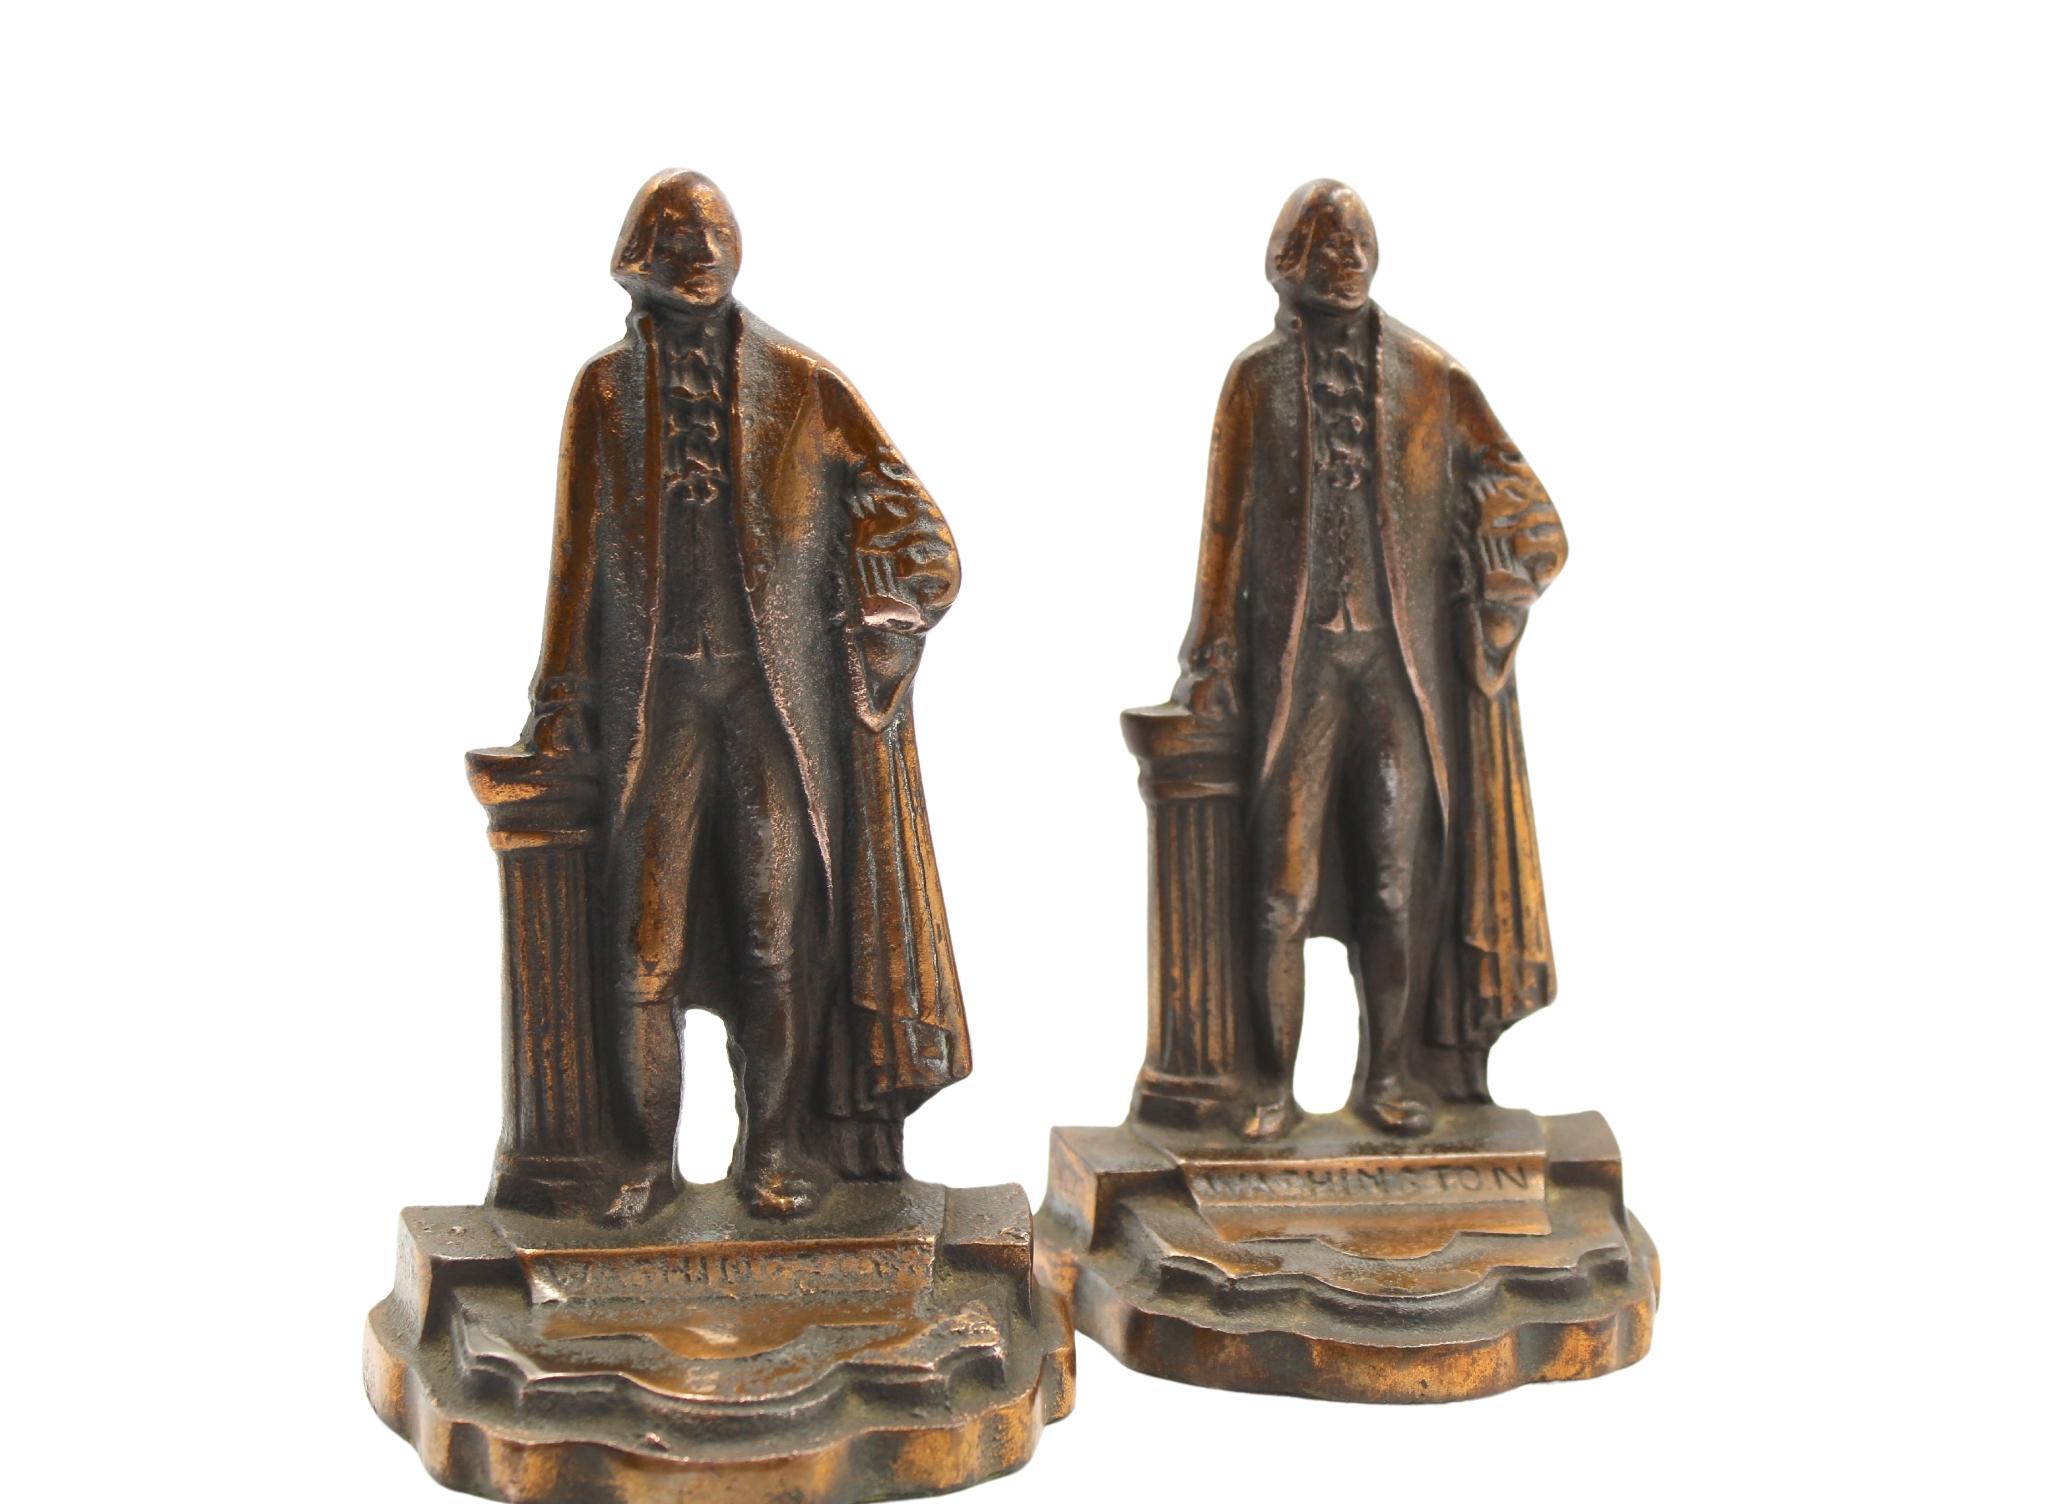 Offered is a vintage set of George Washington bookends. The bookends depict George Washington standing, with his hand resting on a classical column. Washington wears a suit with long flowing robes. The bookends have a square base with George